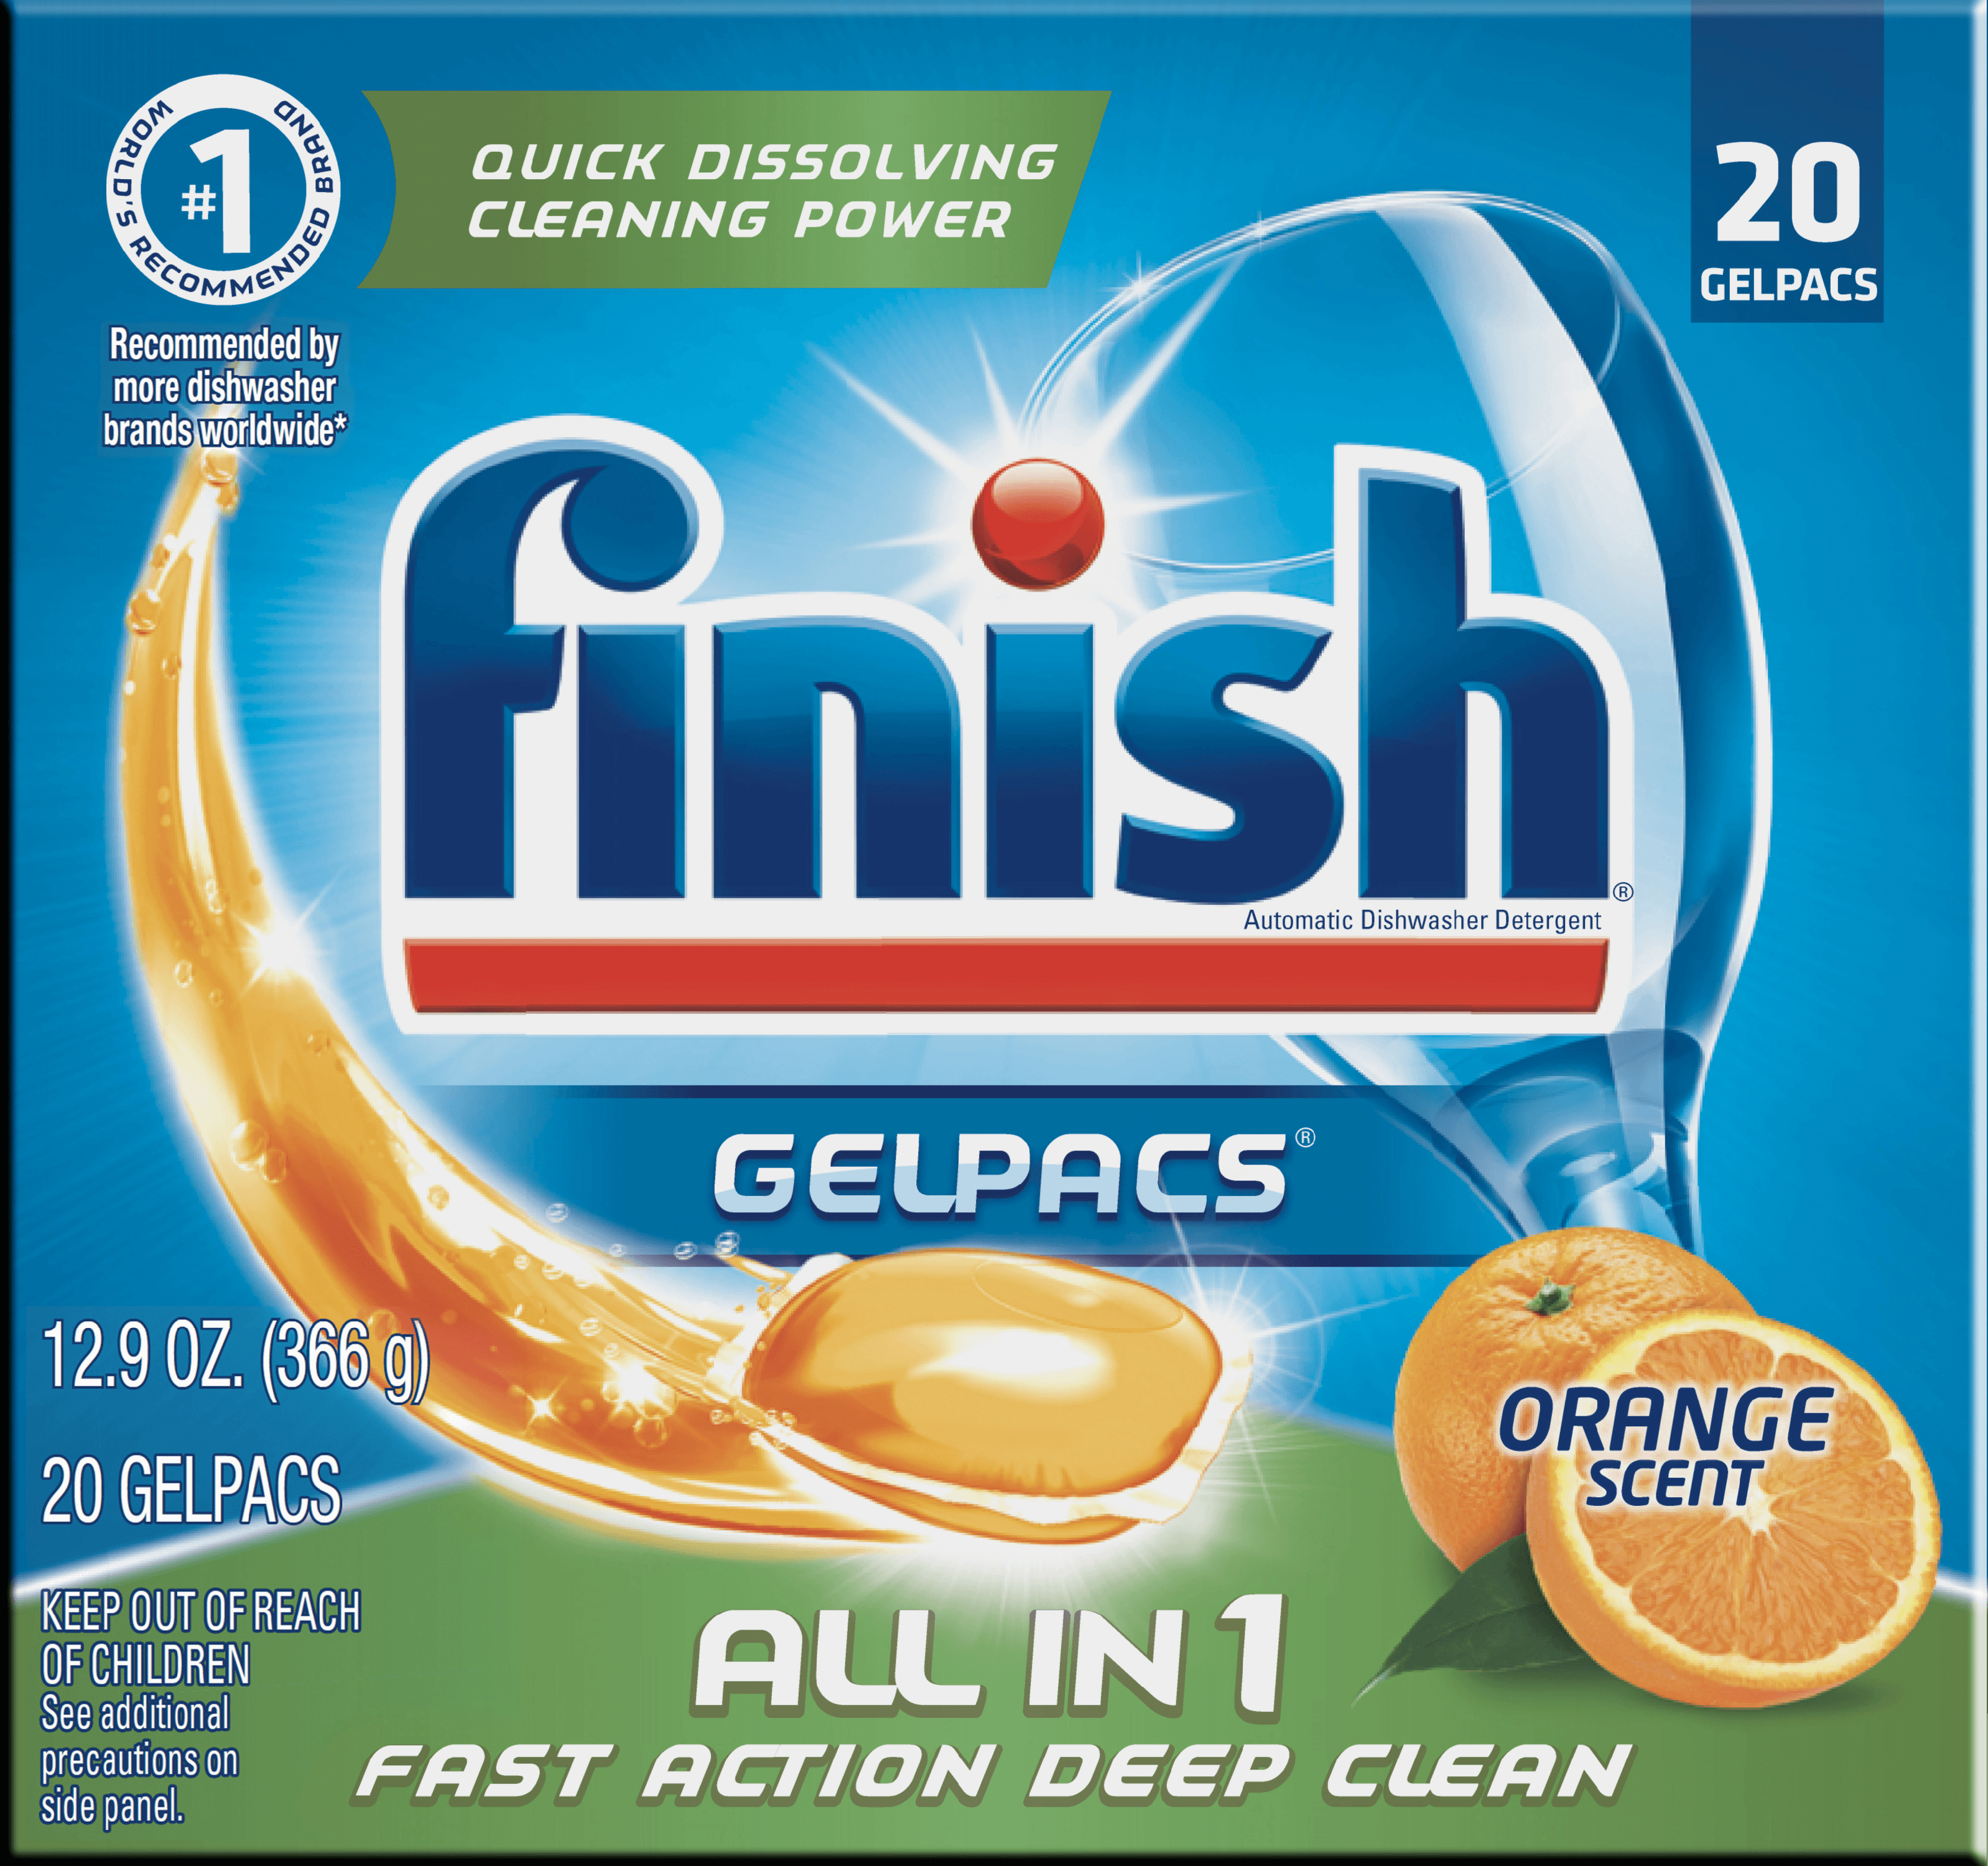 Finish All in 1 Gelpacs Orange, 20ct, Dishwasher Detergent Tablets - image 1 of 6